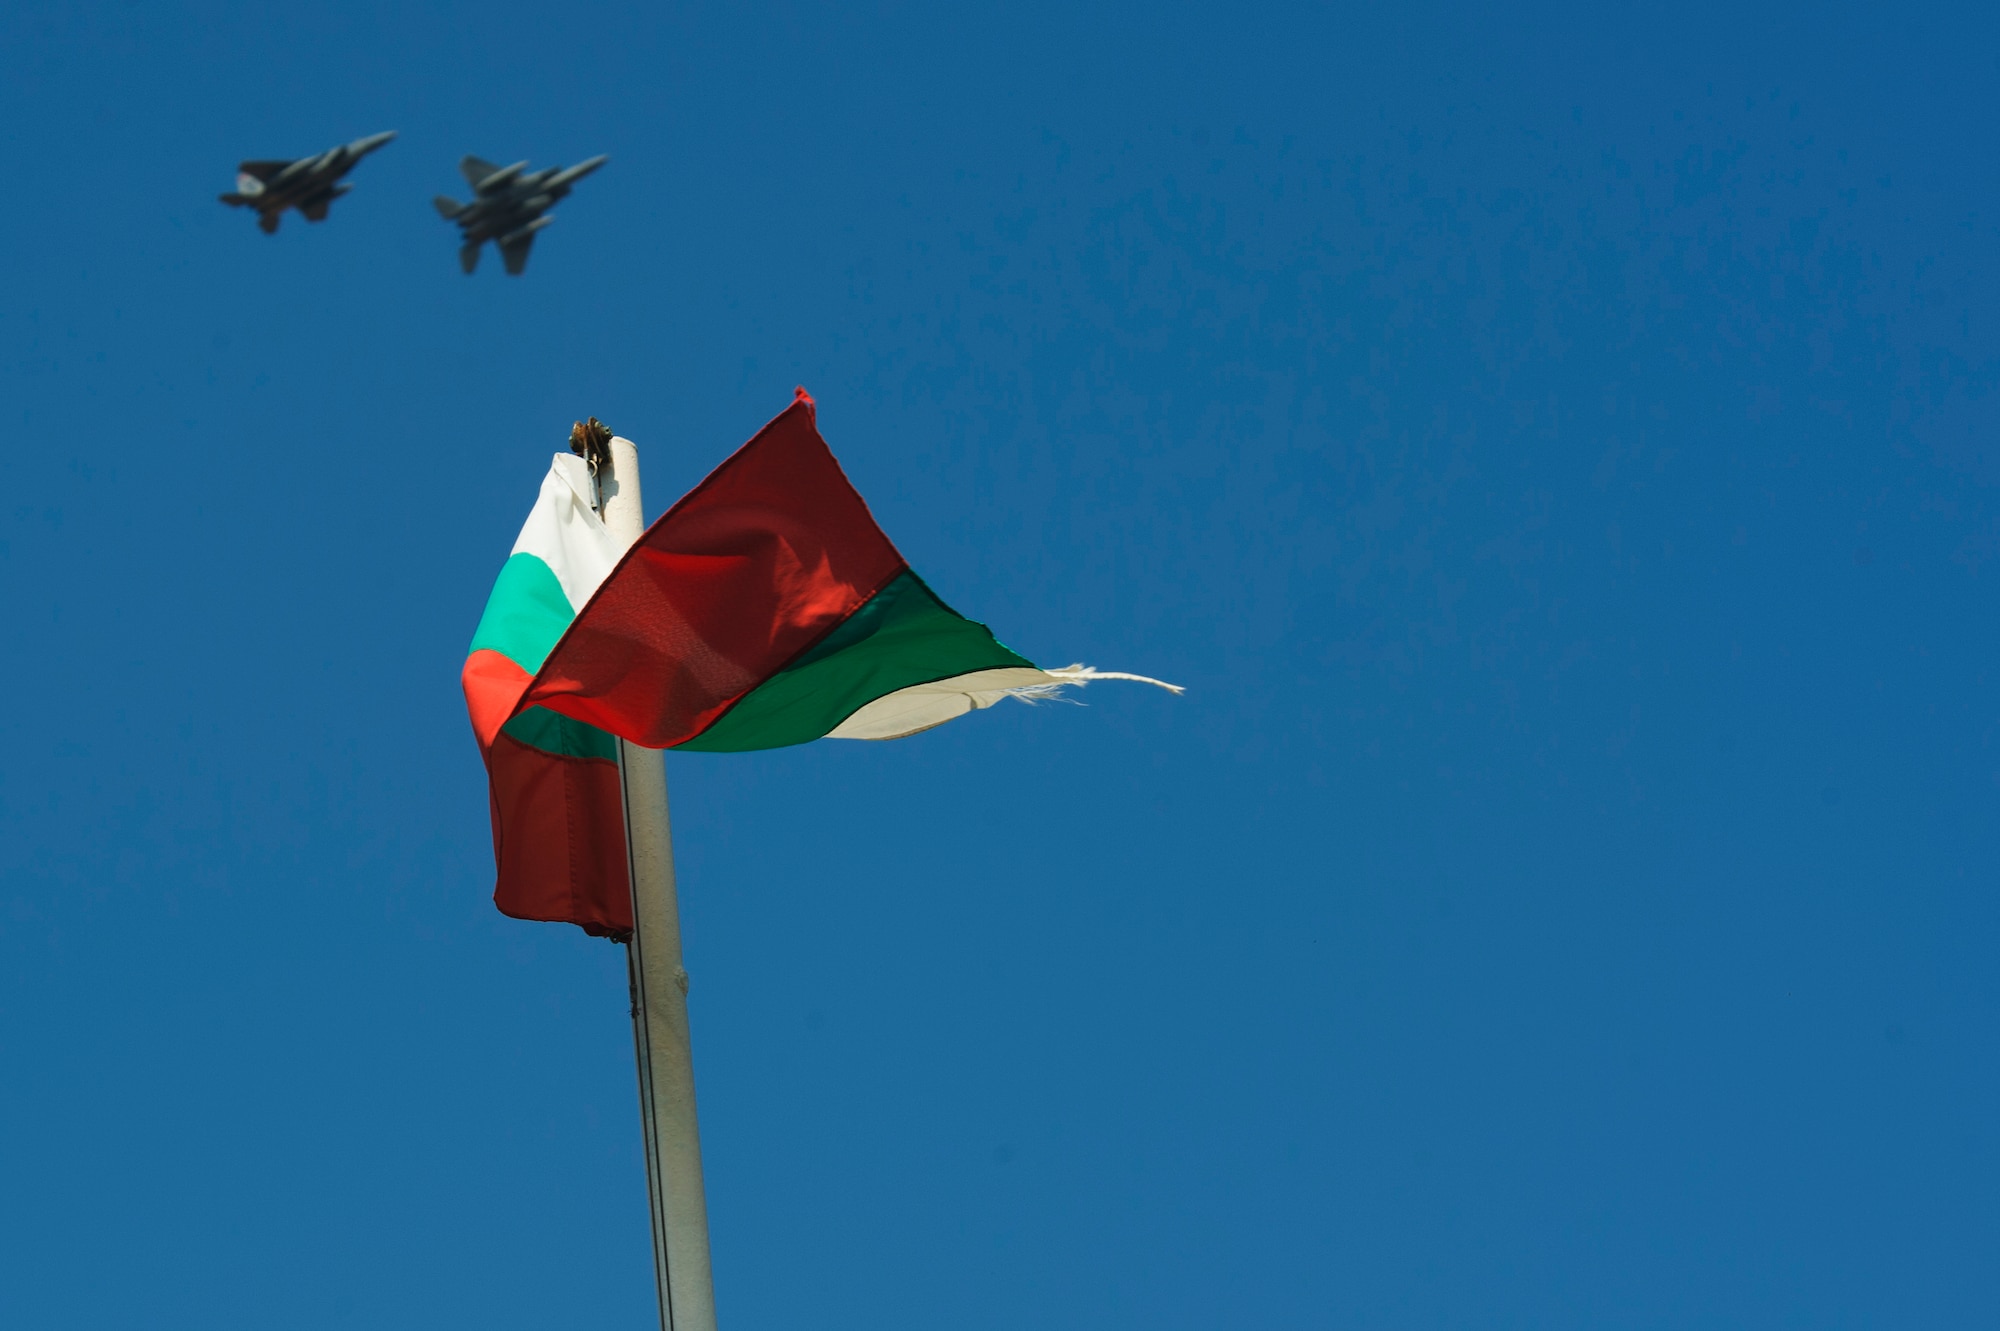 Two California Air National Guard F-15C Eagles fly over a Bulgarian Flag near the flightline at Graf Ignatievo, Bulgaria, Sept. 8, 2016. Four of the 194th Expeditionary Fighter Squadron’s F-15C Eagles will conduct joint NATO air policing missions with the Bulgarian air force to police the host nation’s sovereign airspace Sept. 9-16, 2016. The squadron forward deployed to Graf Ignatievo from Campia Turzii, Romania, where they serve on a theater security package deployment to Europe as a part of Operation Atlantic Resolve. (U.S. Air Force photo by Staff Sgt. Joe W. McFadden) 